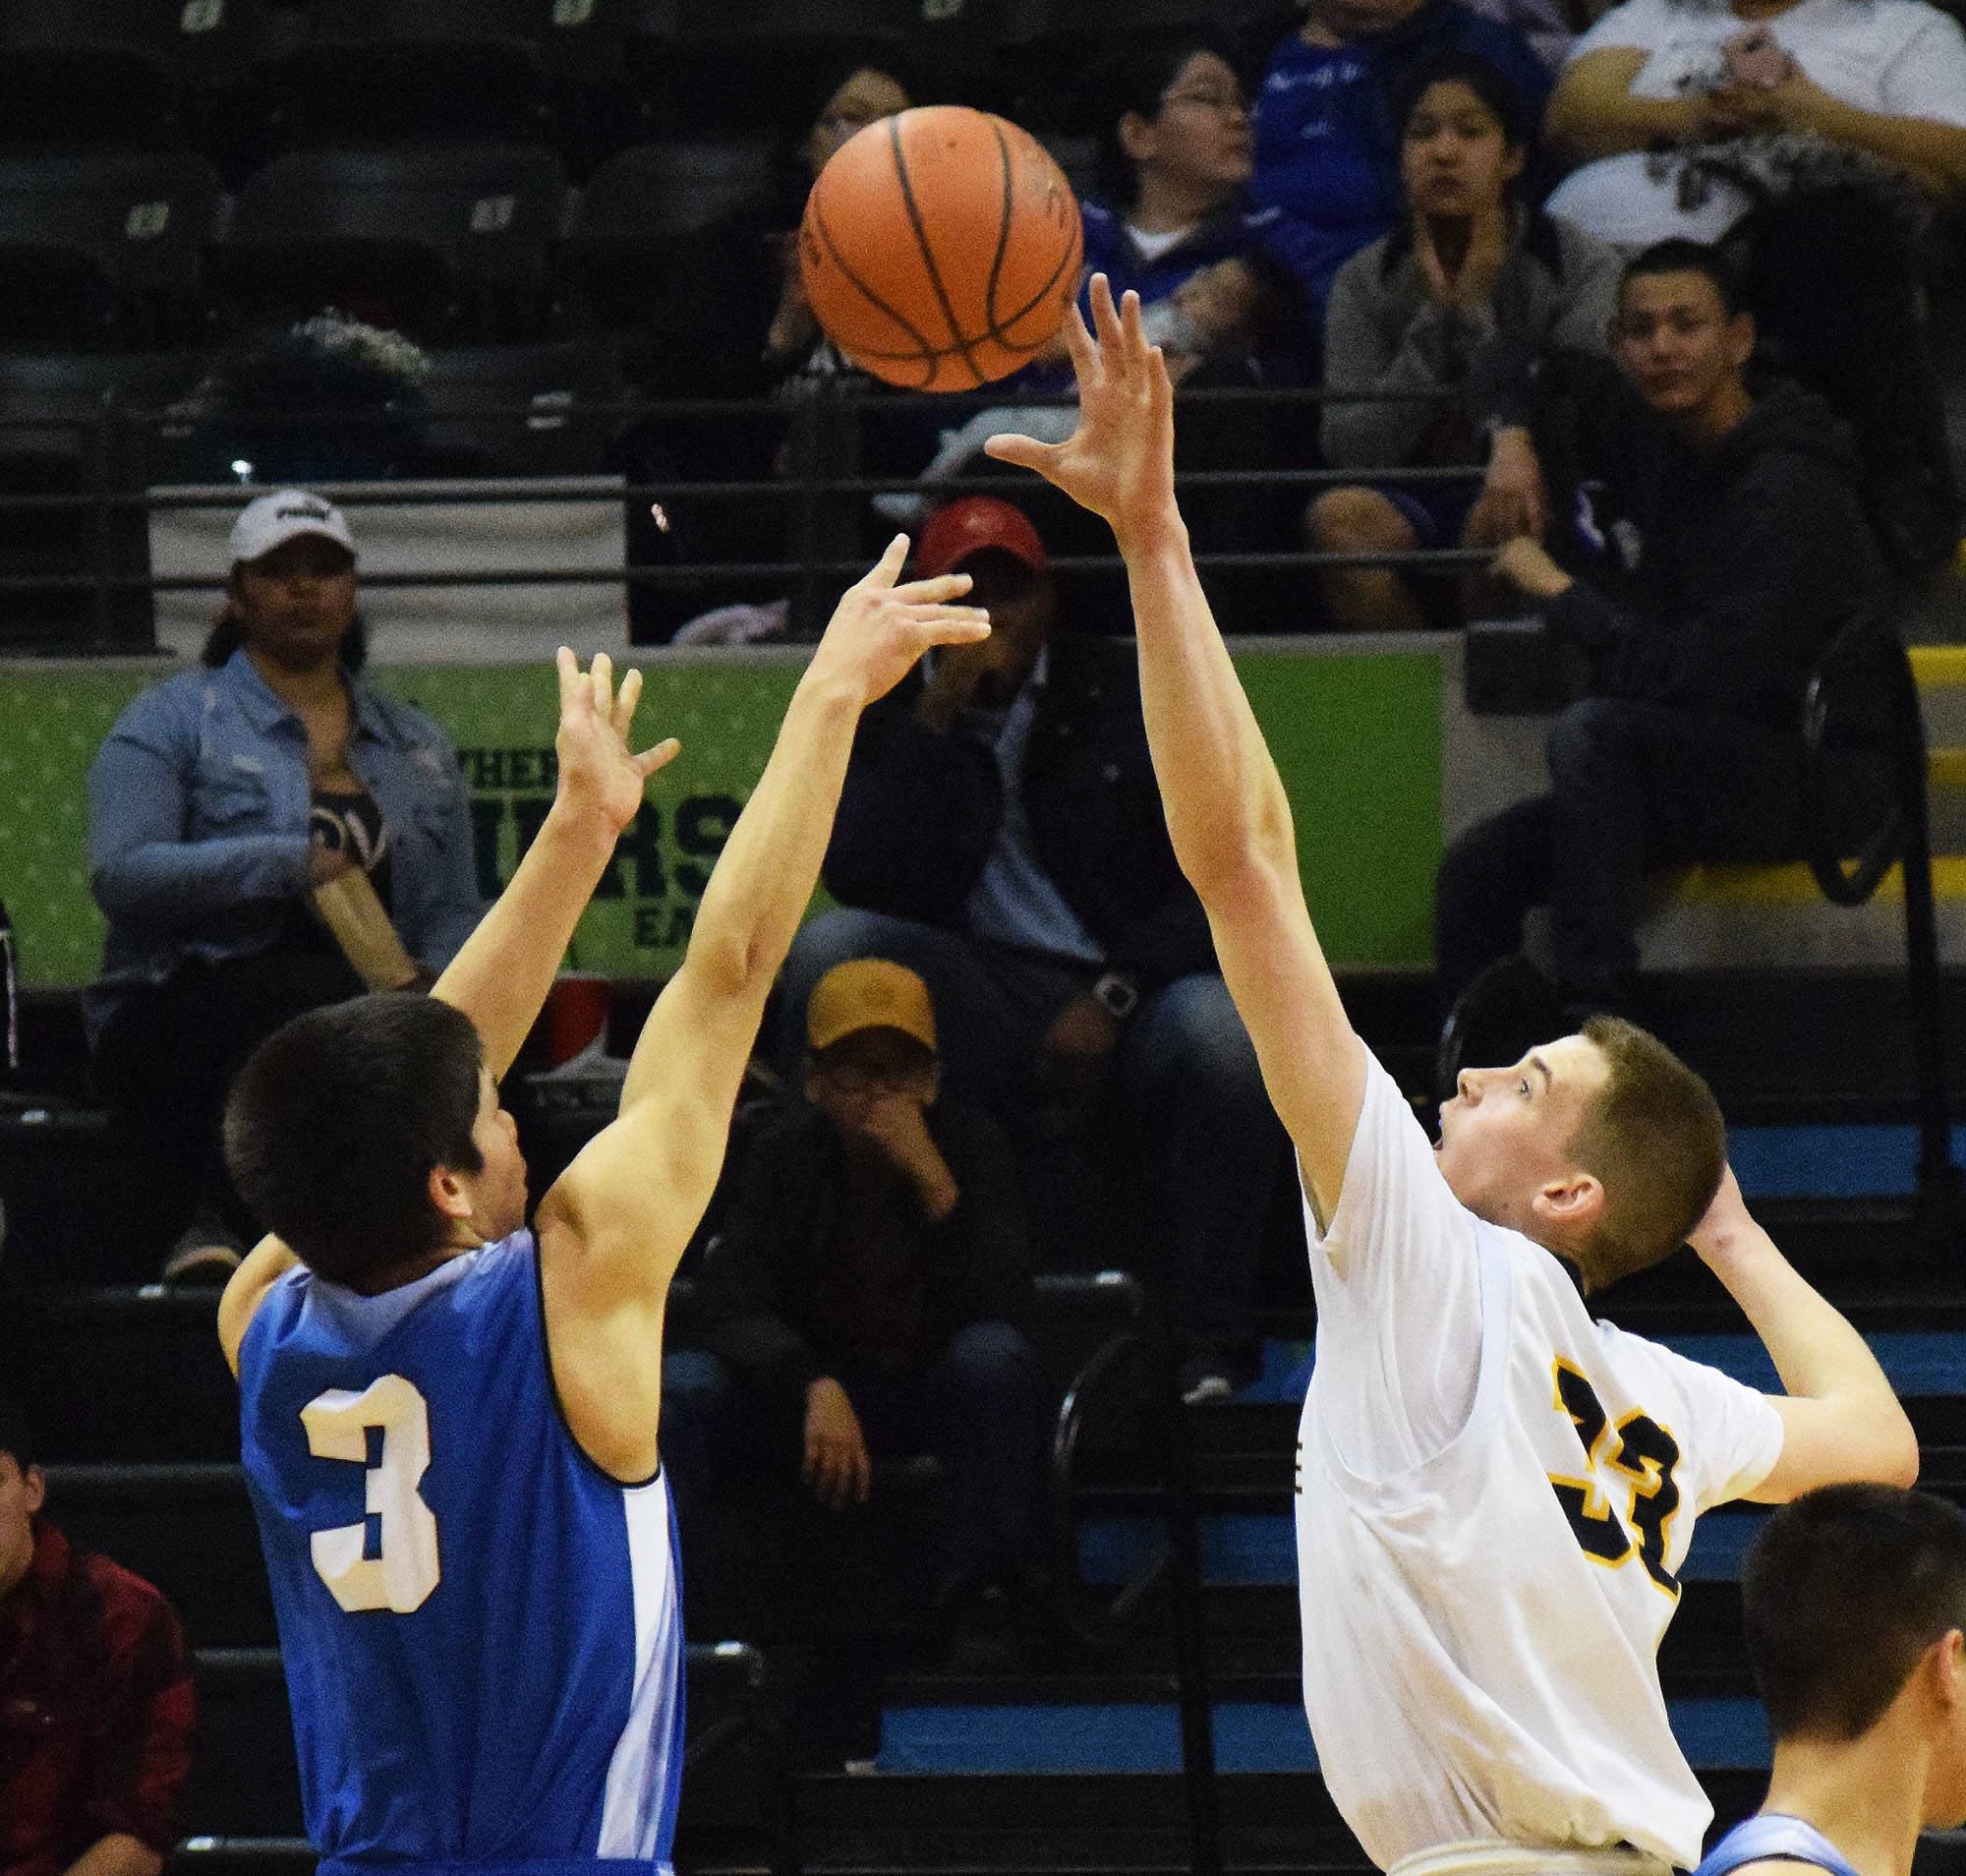 Ninilchik’s Austin White (right) puts a block on Gambell’s Andrew Aningayou in the Class 1A boys state championship Saturday, March 18, 2017, at the Alaska Airlines Center in Anchorage. (Photo by Joey Klecka/Peninsula Clarion)